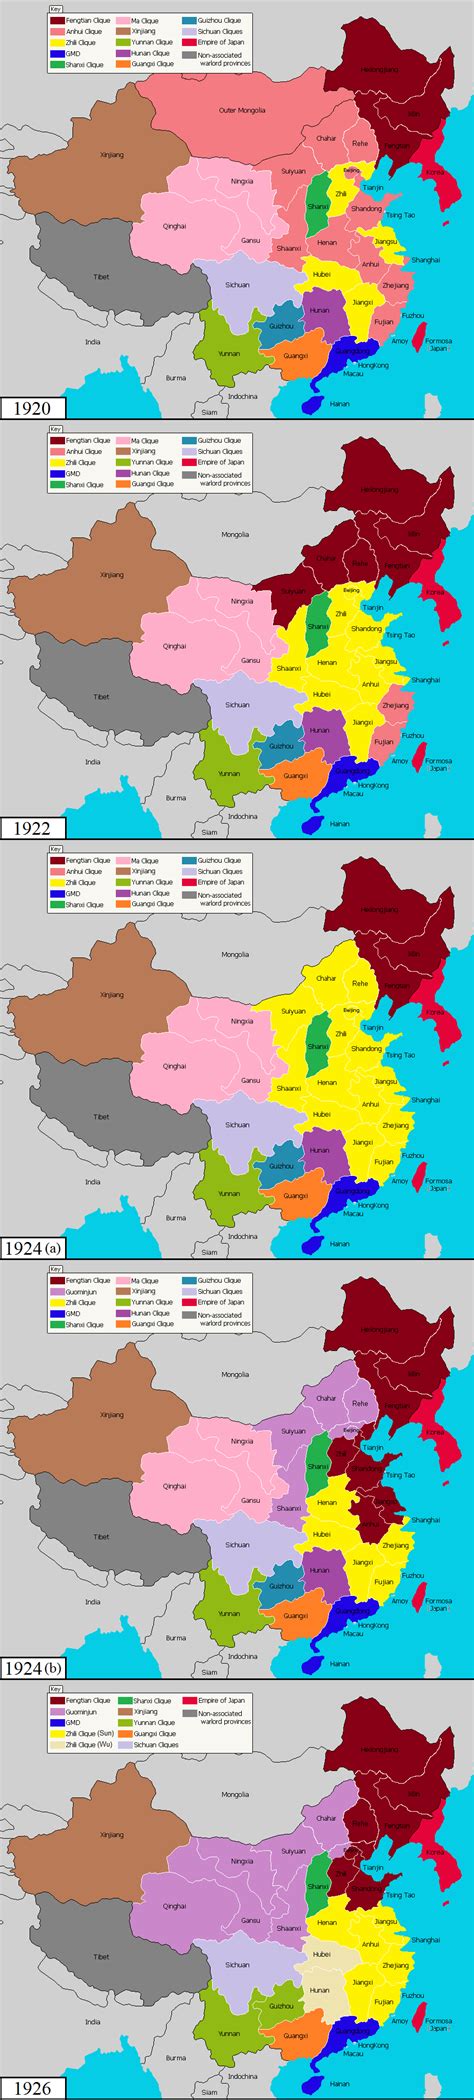 Chinese Warlord Era Which Began In And Ended In